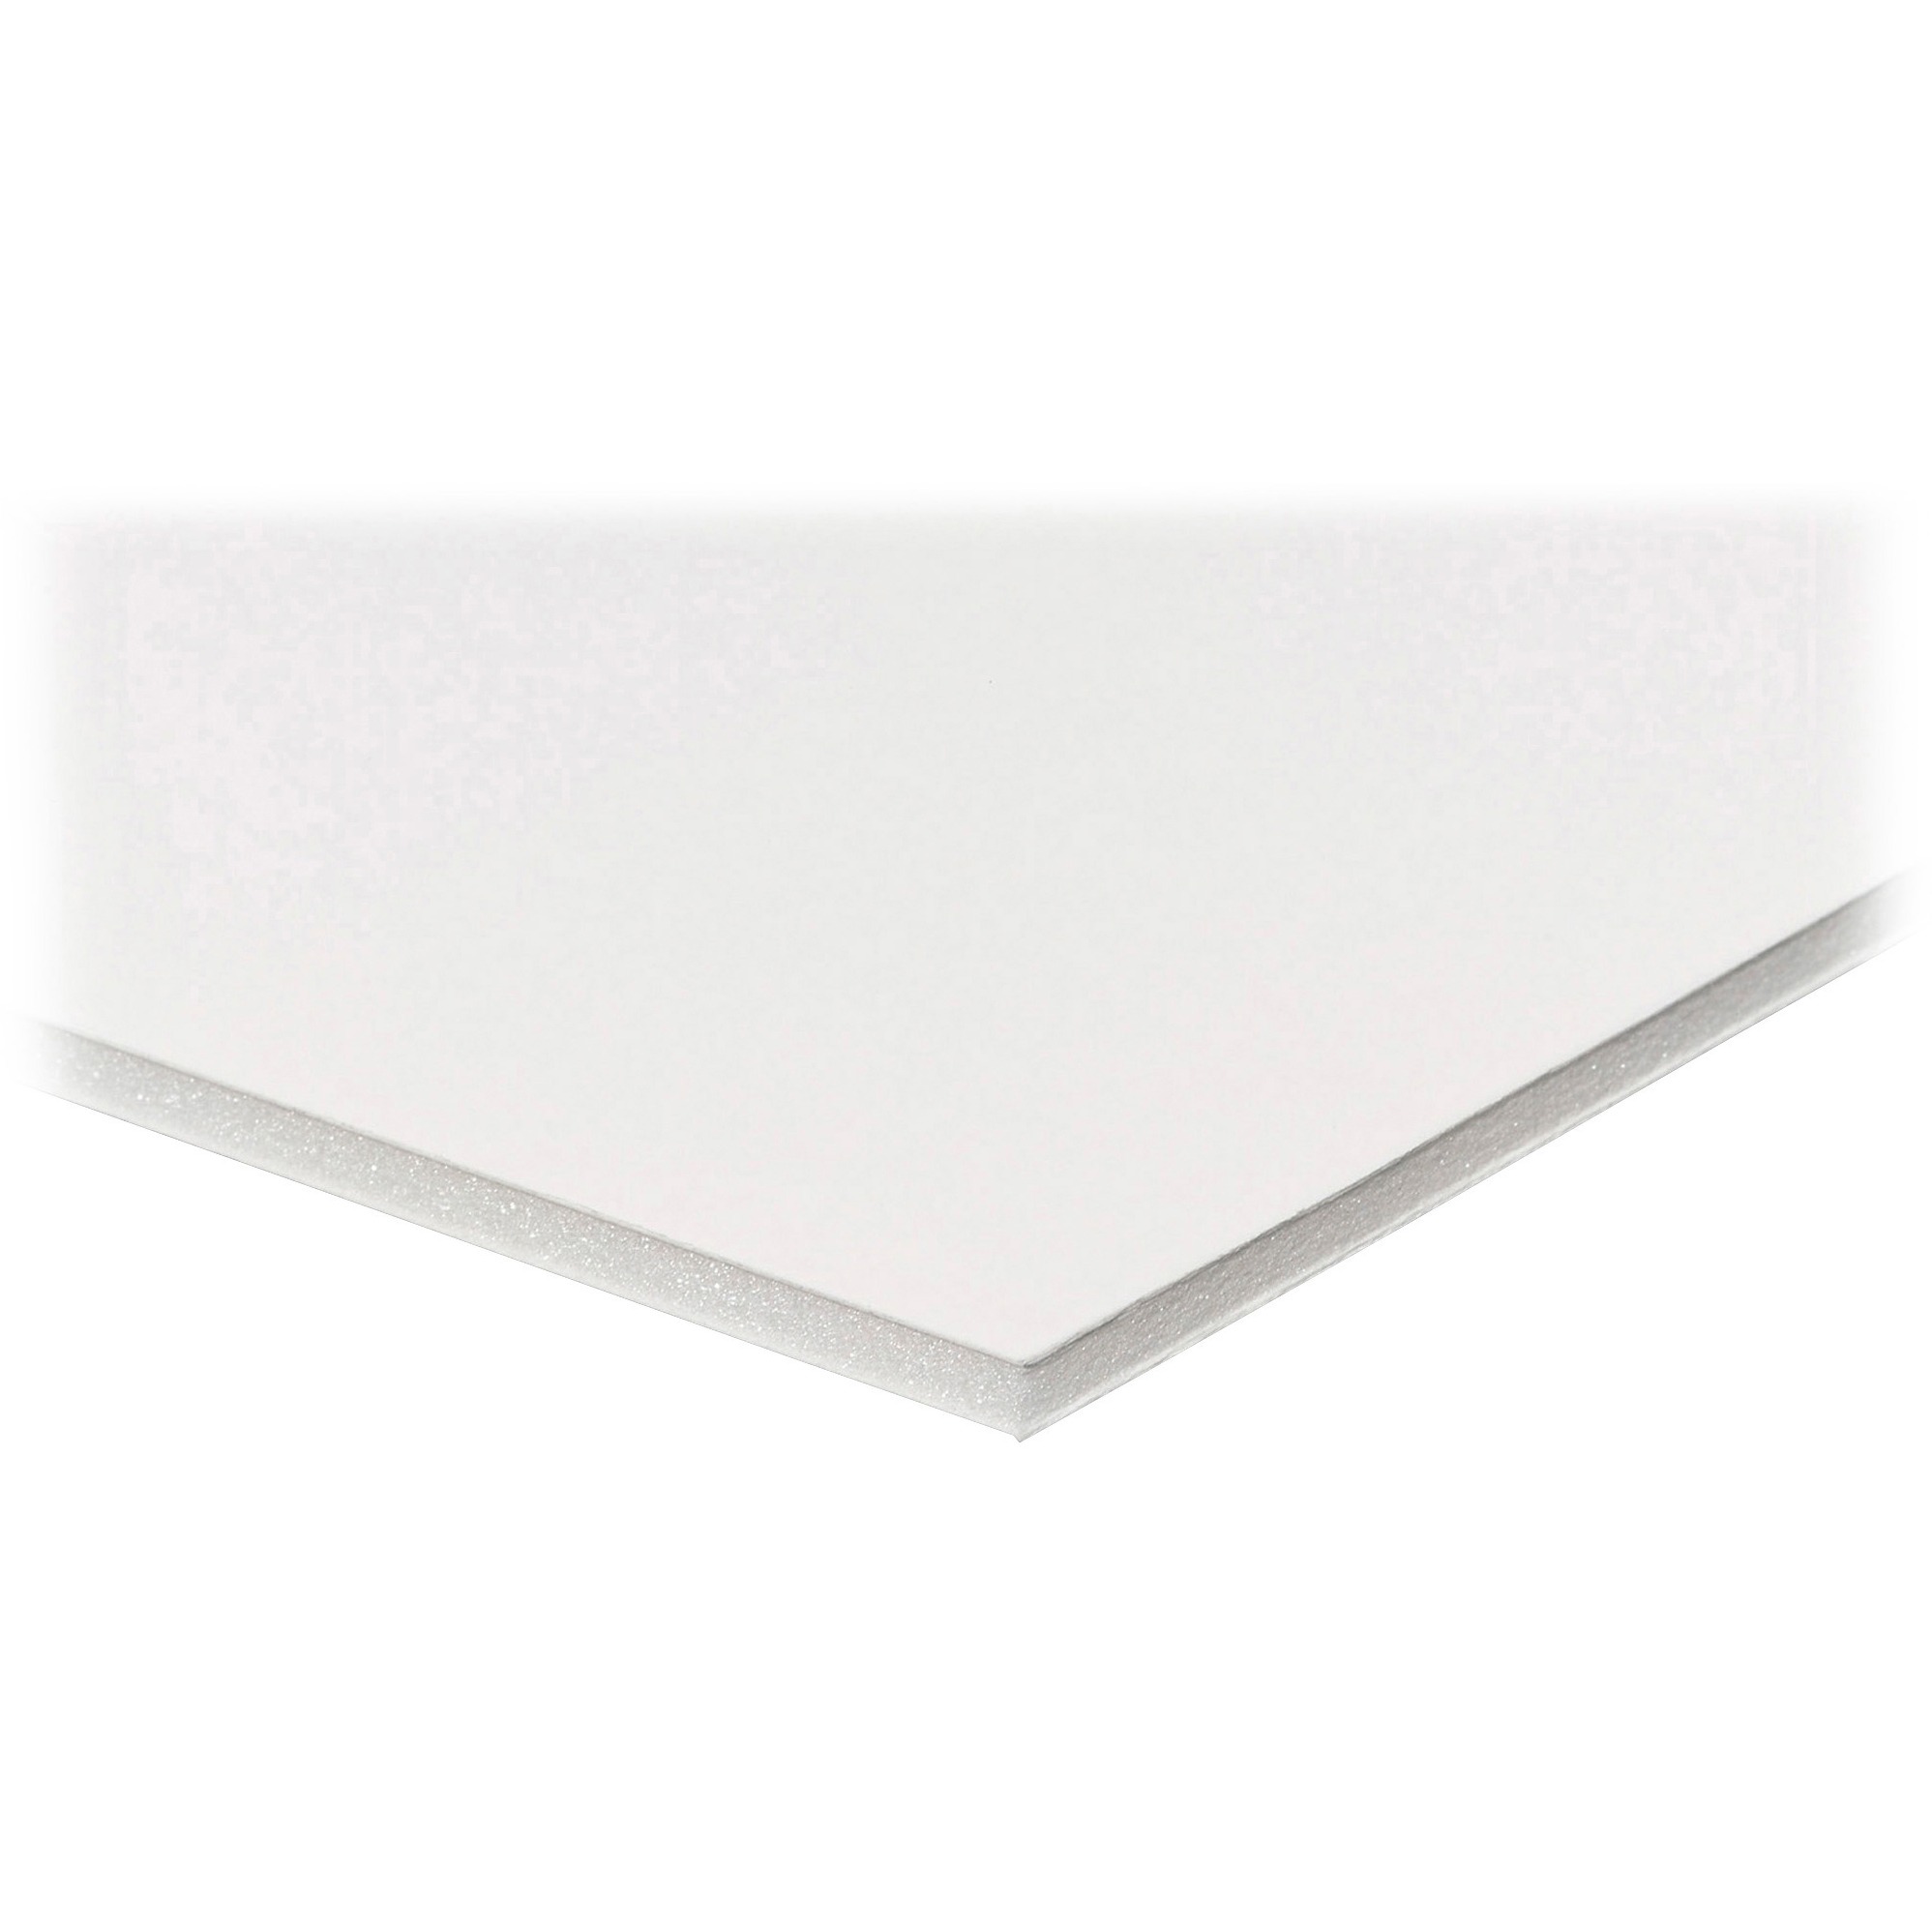 Polystyrene Foam Board, 30 x 40, White Surface and Core, 10/Case